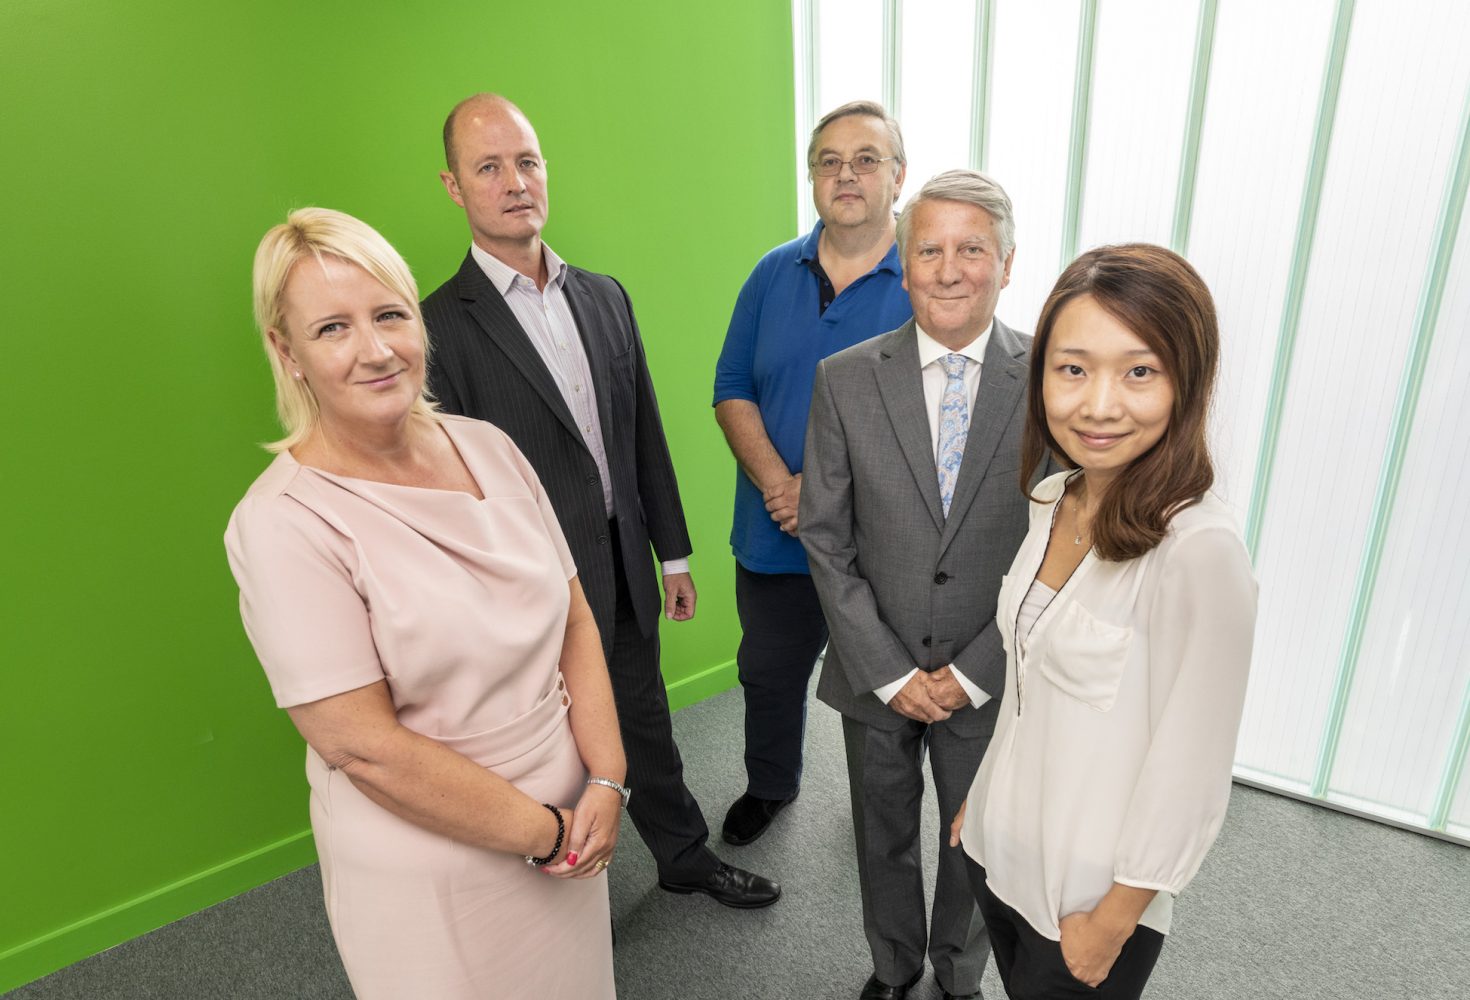 Five people in an office standing in front of a bright green wall. There are two women and the woman to the far left has a peach coloured dress on and has blonde hair. The additional woman on the far right is Asian and has long dark hair and is wearing a white shirt.